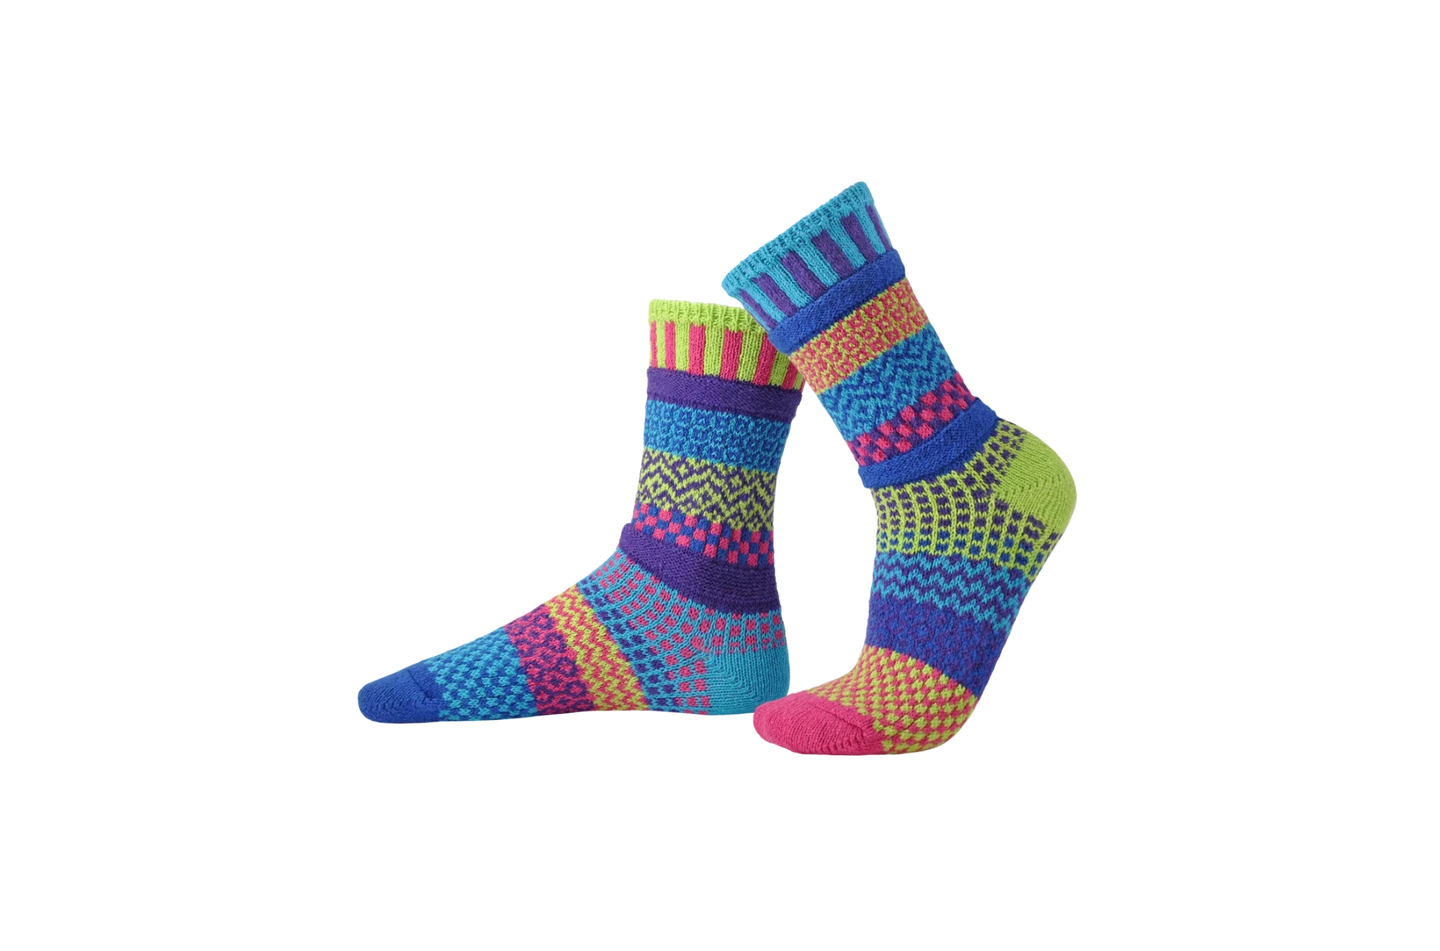 Solmate Bluebell socks :inspired by the colorful flowers that spring brings. Colors in this sock: lime green, turquoise, purple, royal blue, fuchsia.